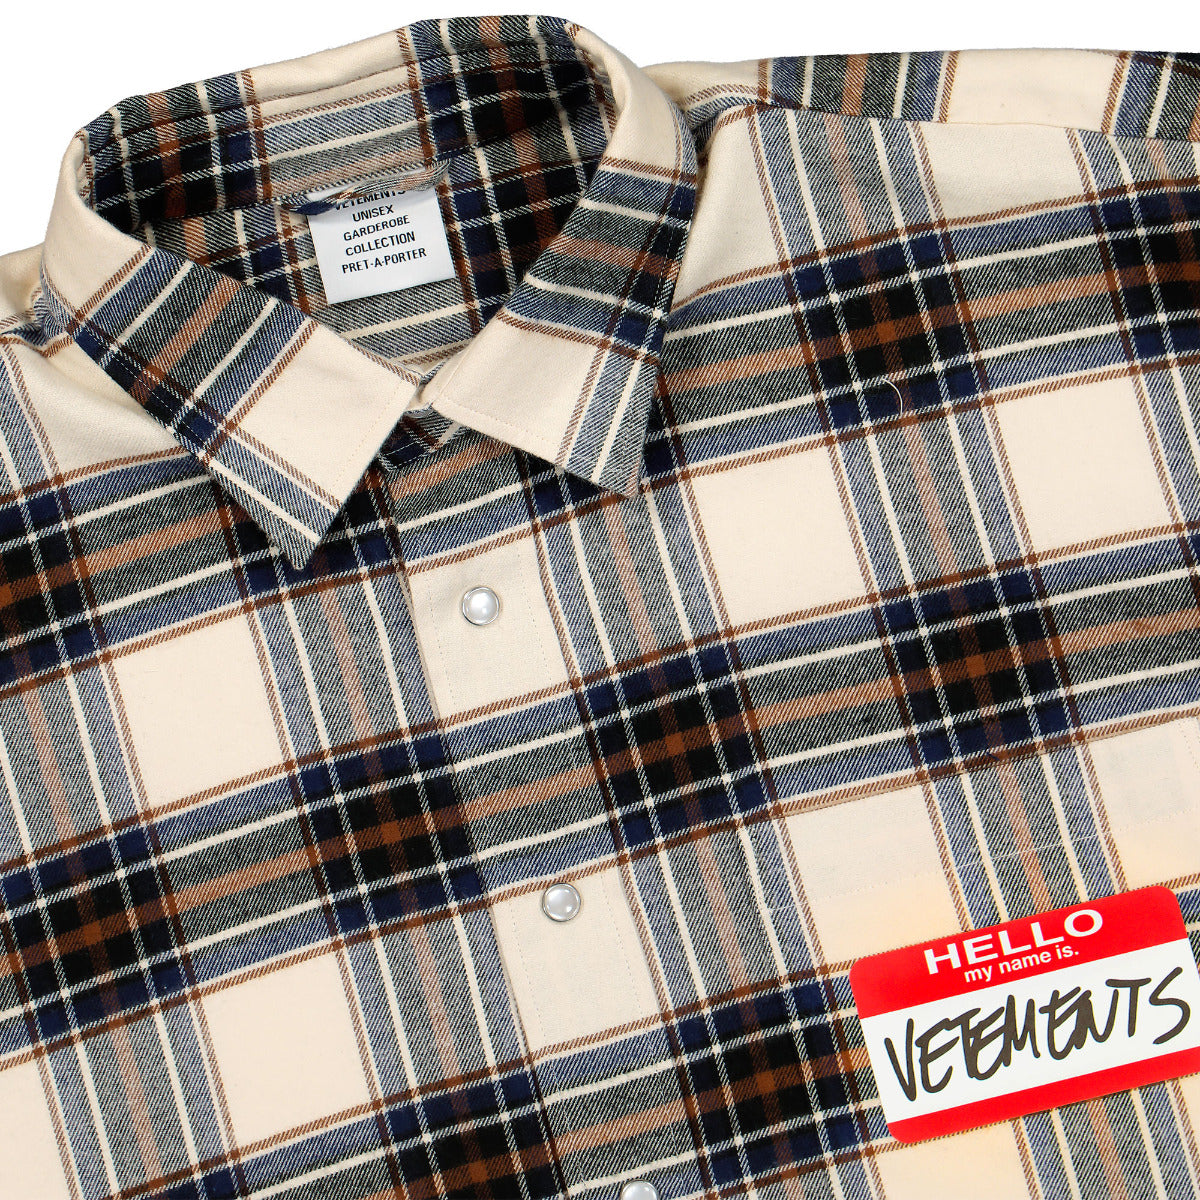 My Name Is Vetements Sleeveless Flannel Shirt | GATE